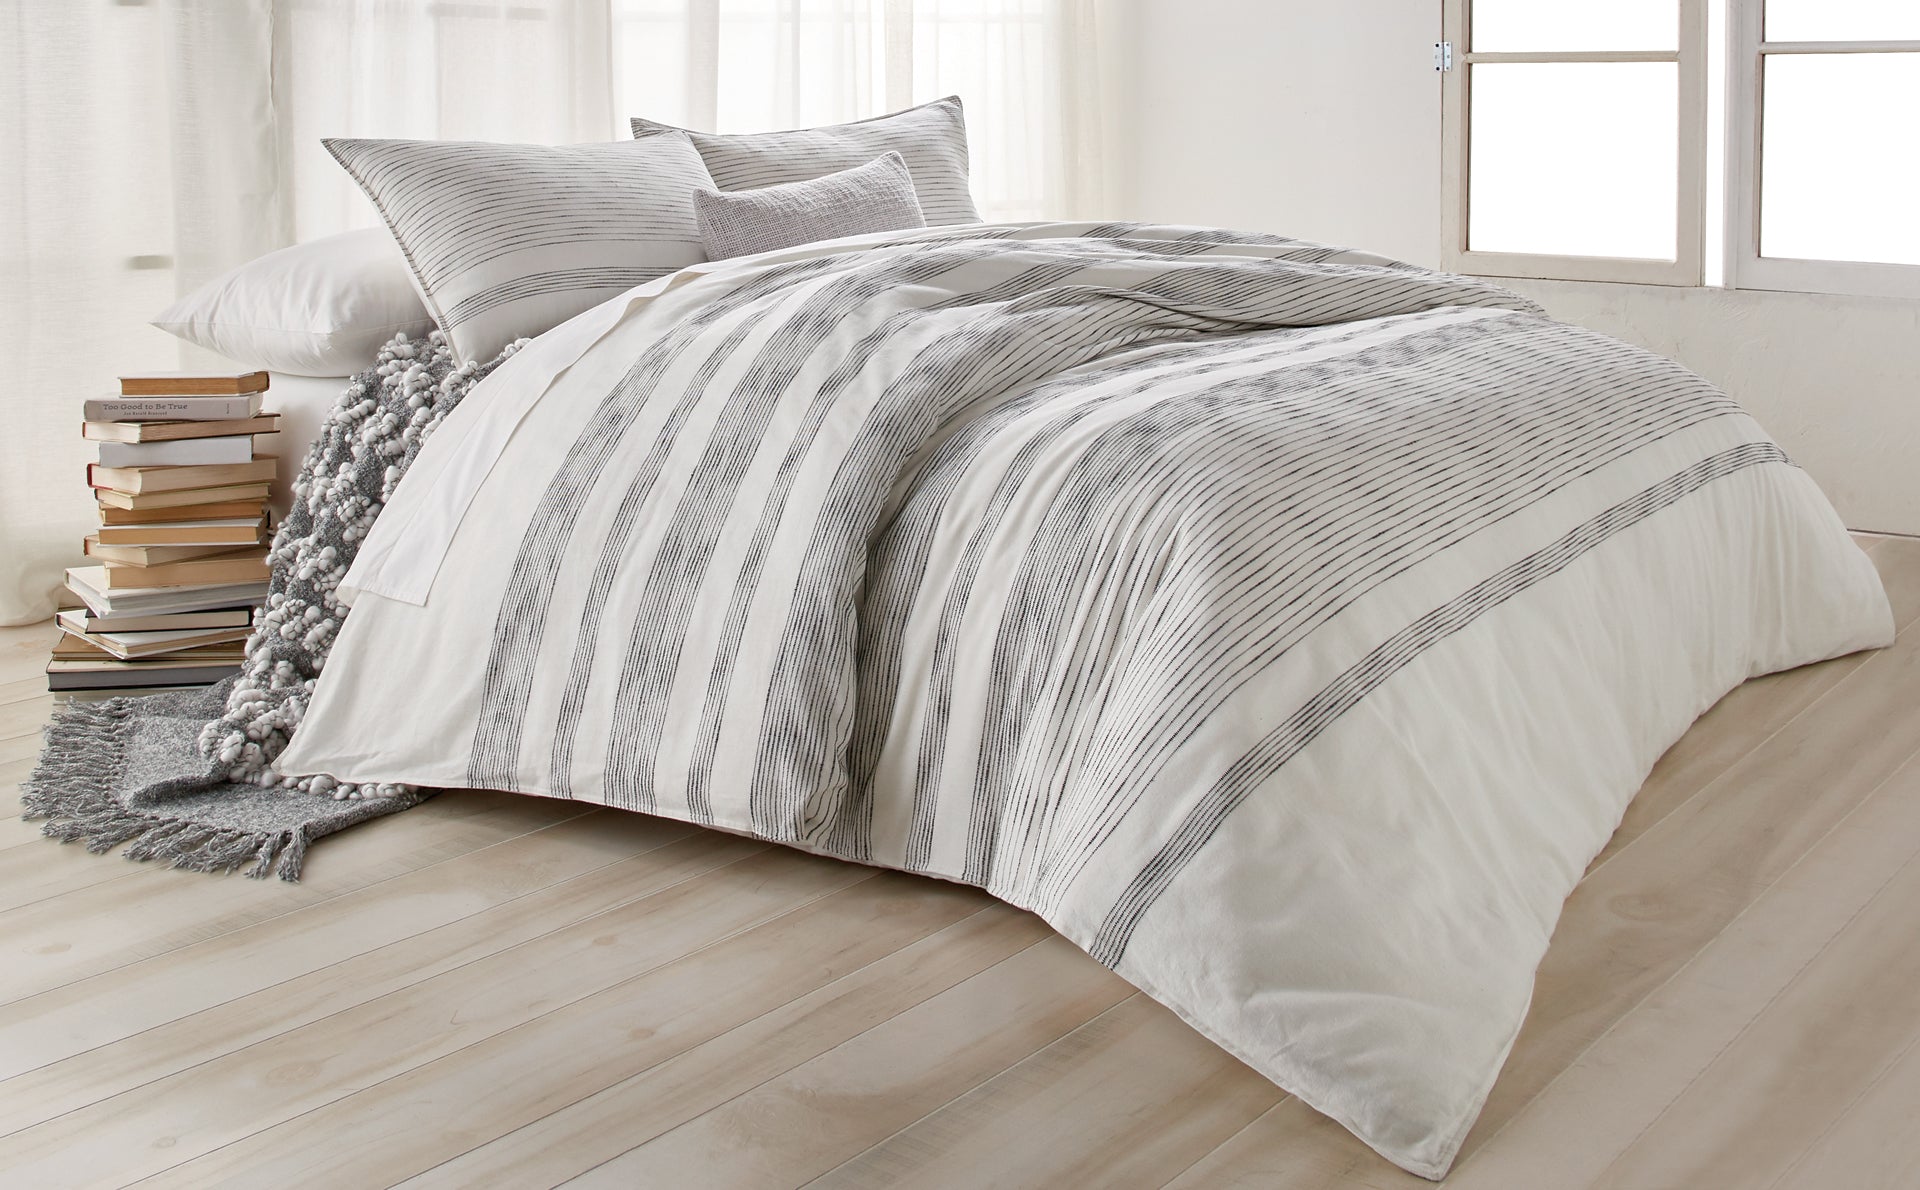 DKNY PURE Woven Stripe Bedding Collection